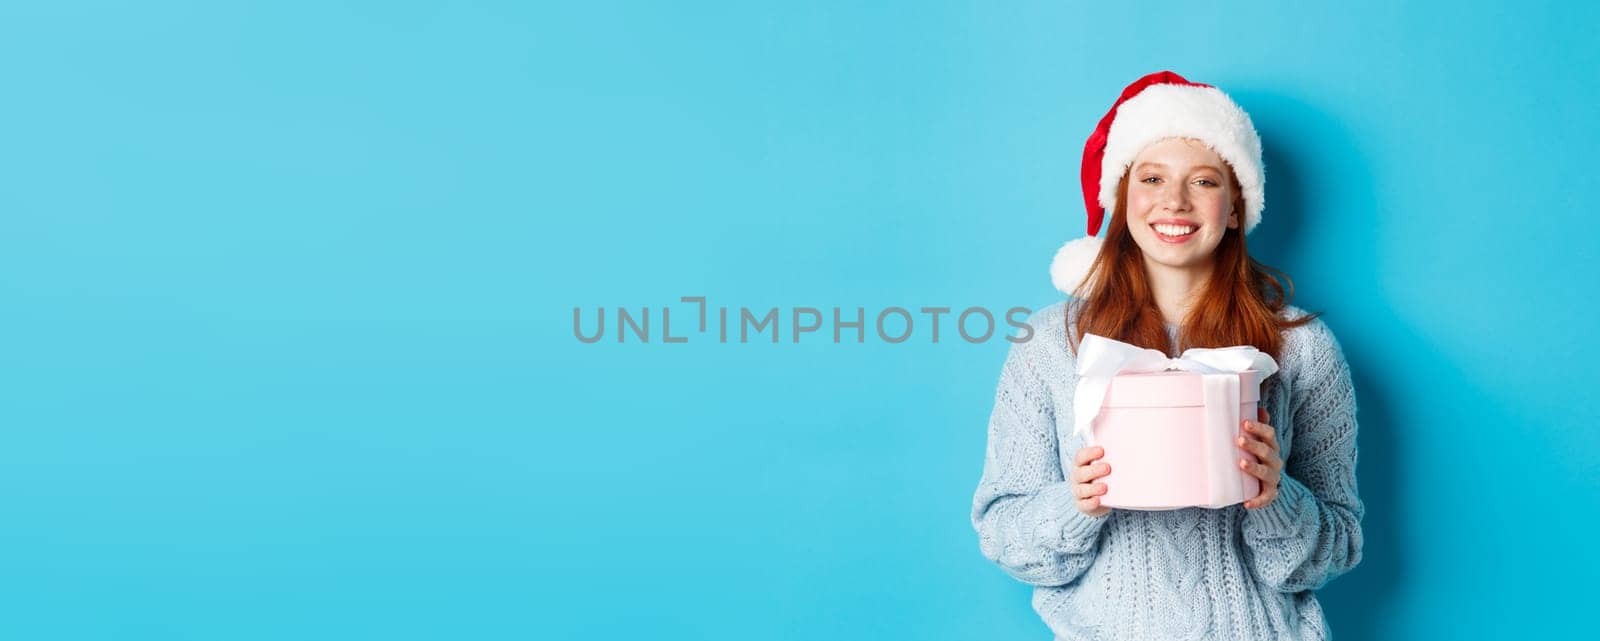 Winter holidays and Christmas Eve concept. Smiling redhead girl in sweater and Santa hat, holding New Year gift and looking at camera, standing against blue background.